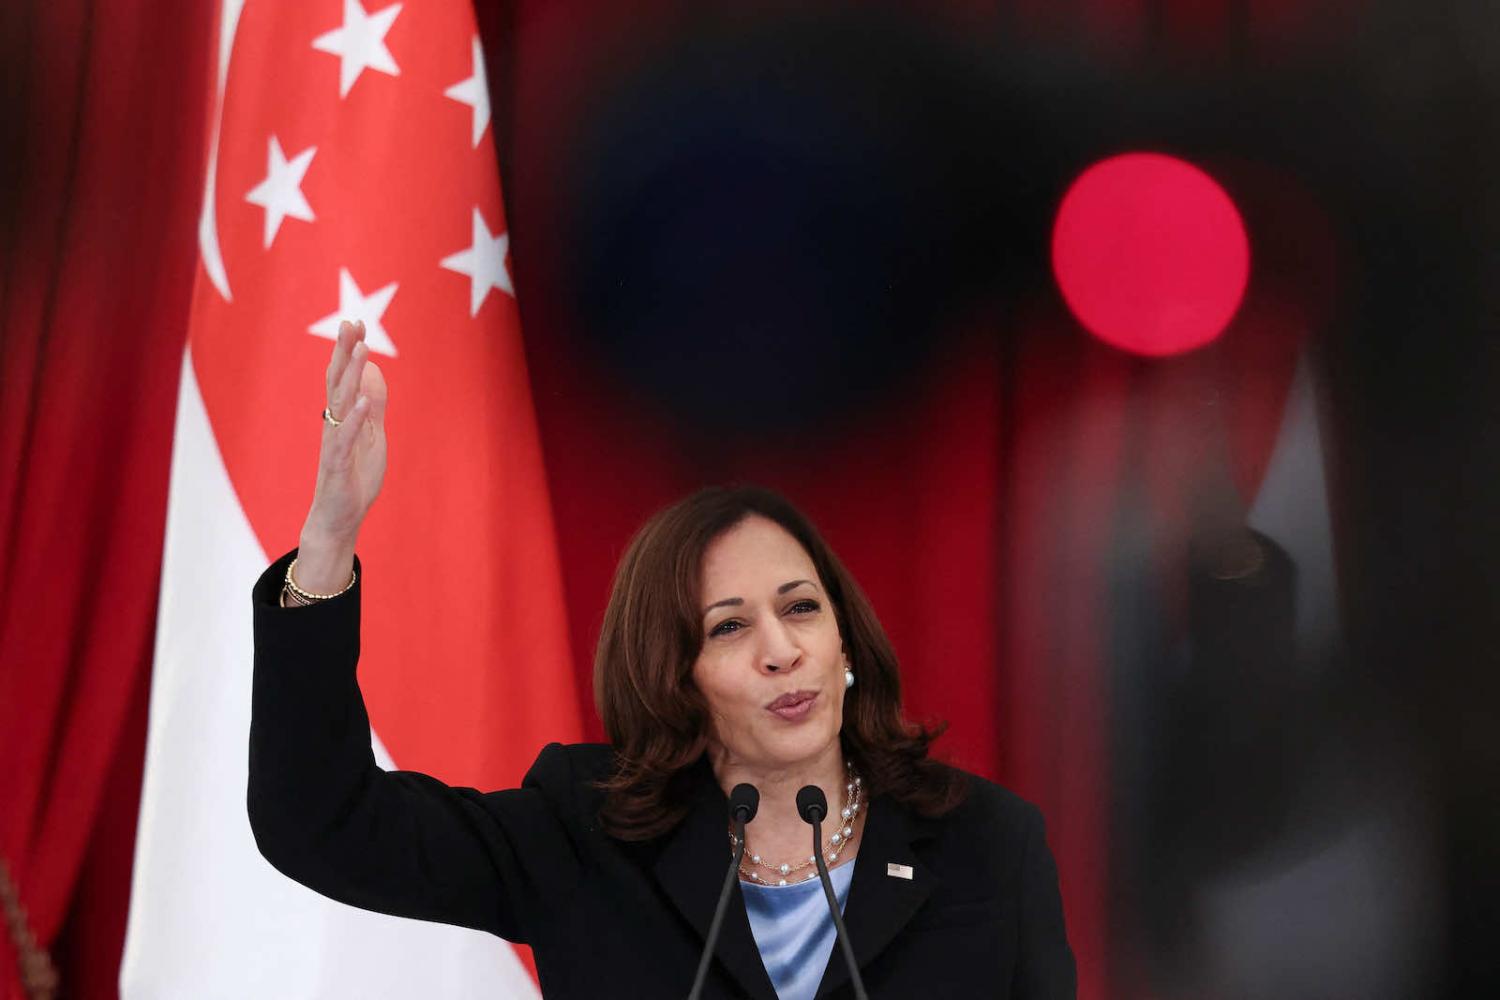 US Vice President Kamala Harris during a joint news conference with Singapore's Prime Minister Lee Hsien Loong in August (Evelyn Hockstein/AFP via Getty Images)